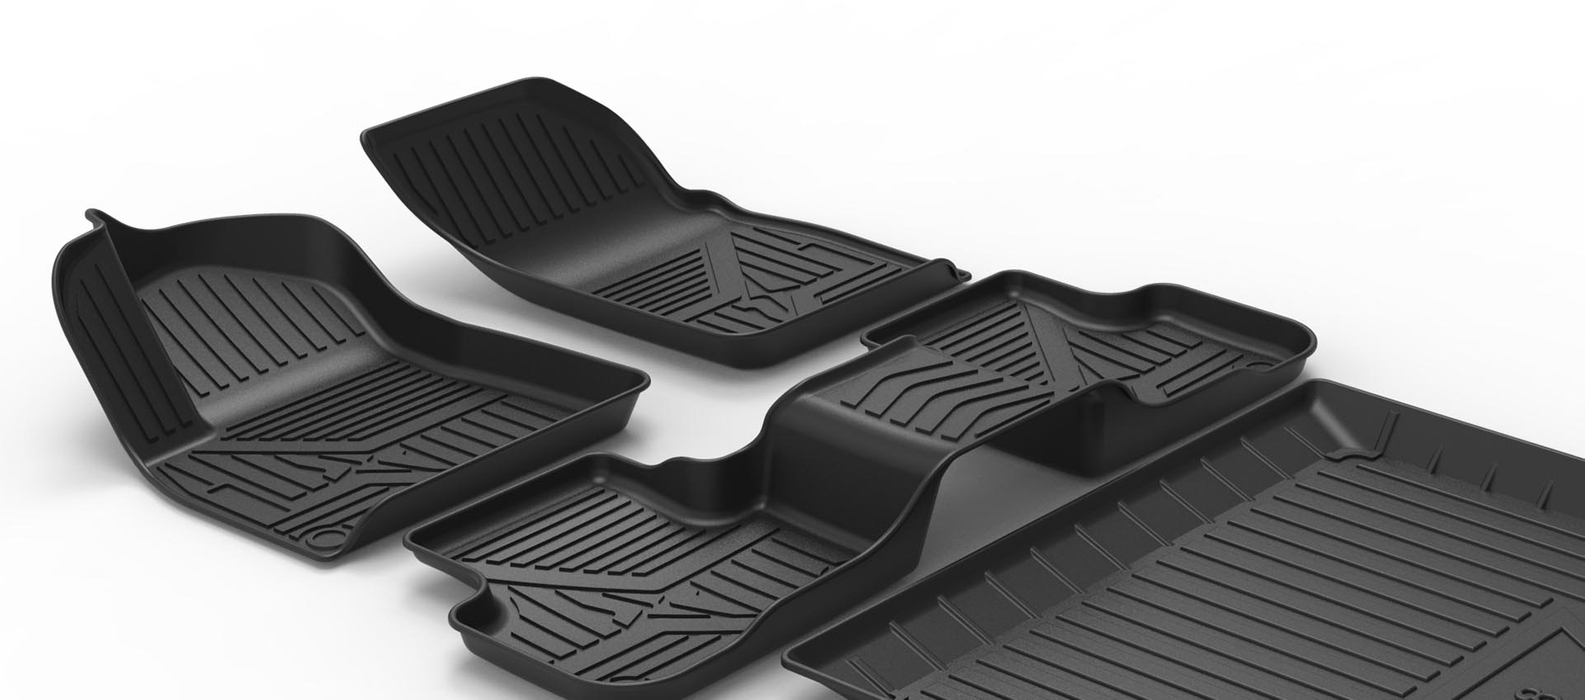 Car Floor Mats Are Now Available